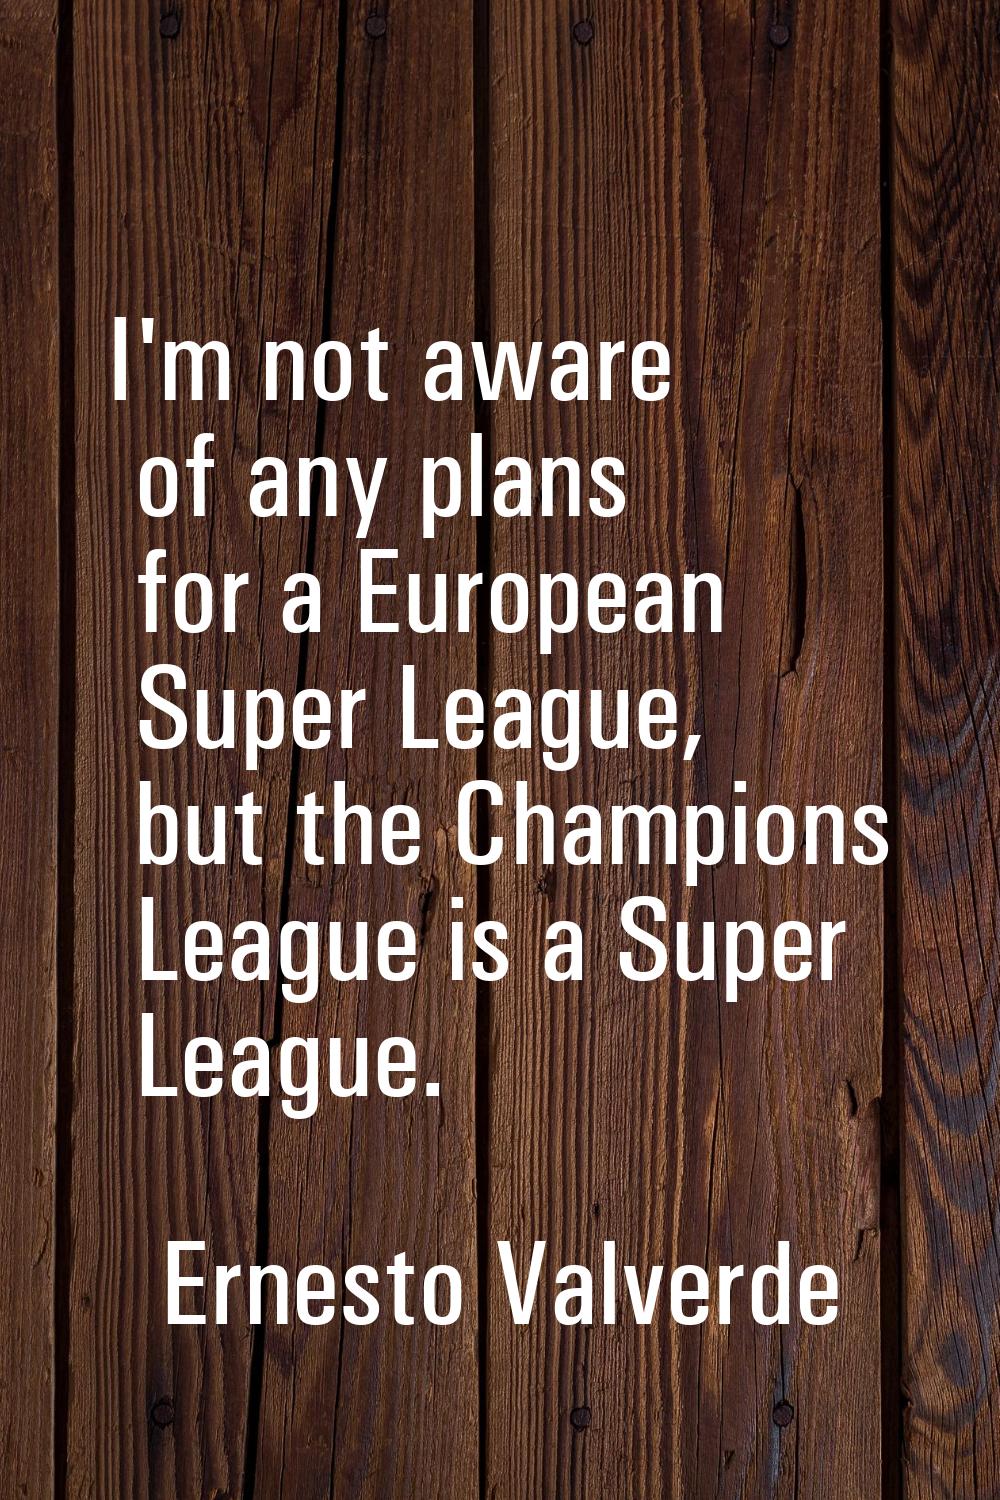 I'm not aware of any plans for a European Super League, but the Champions League is a Super League.